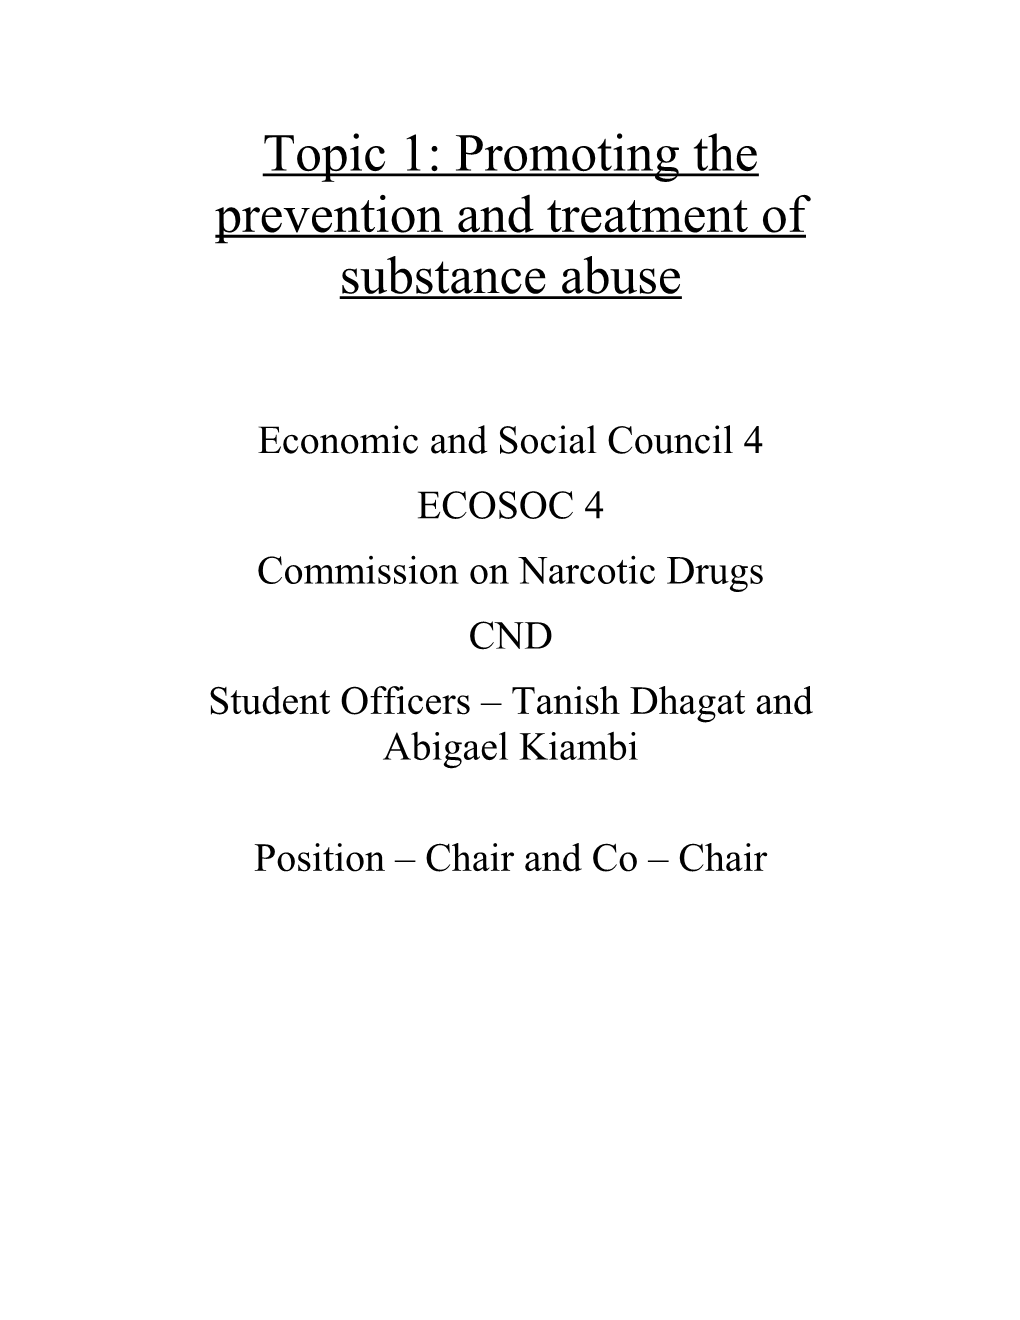 Topic 1: Promoting the Prevention and Treatment of Substance Abuse